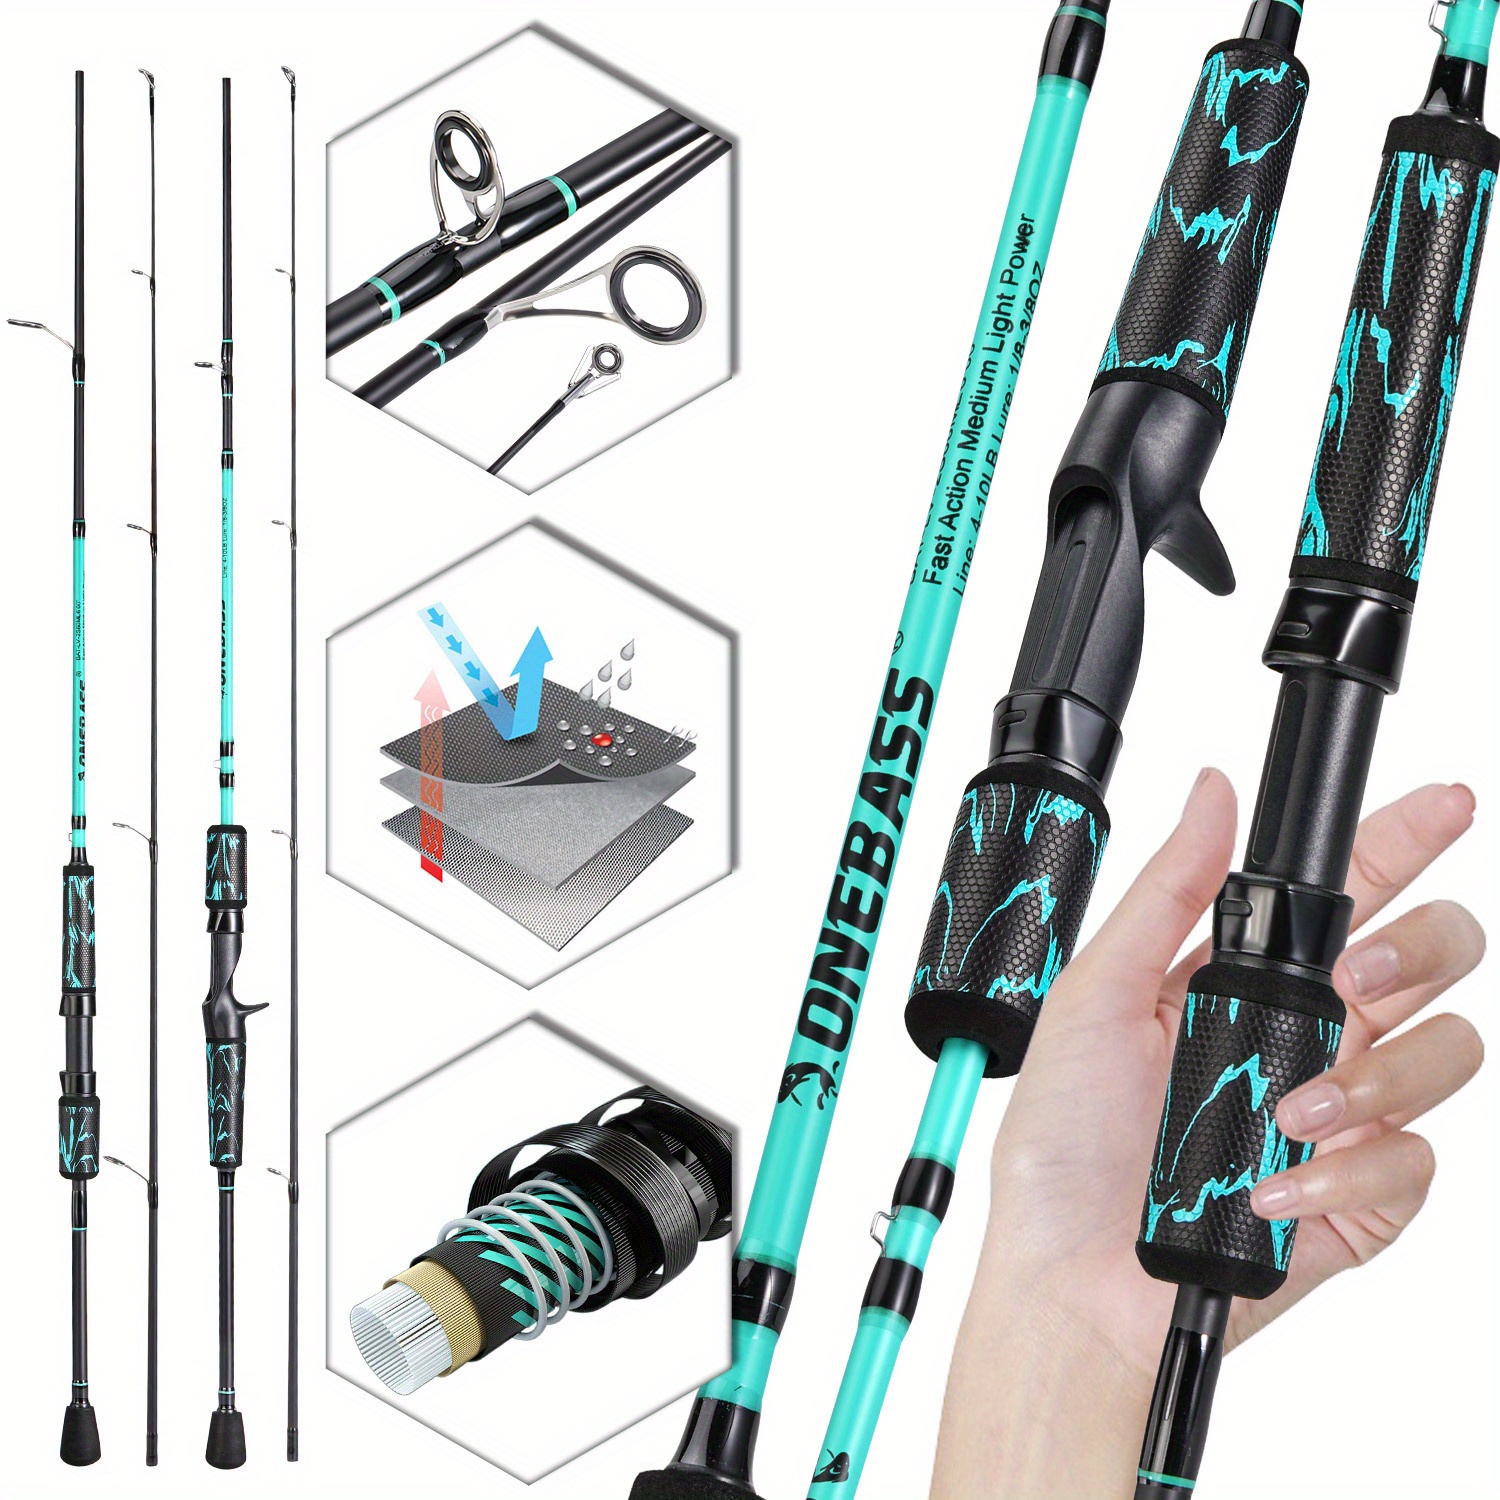 Powerful Trout Spinning Casting Fishing Rod Pole Fast Carbon Fiber